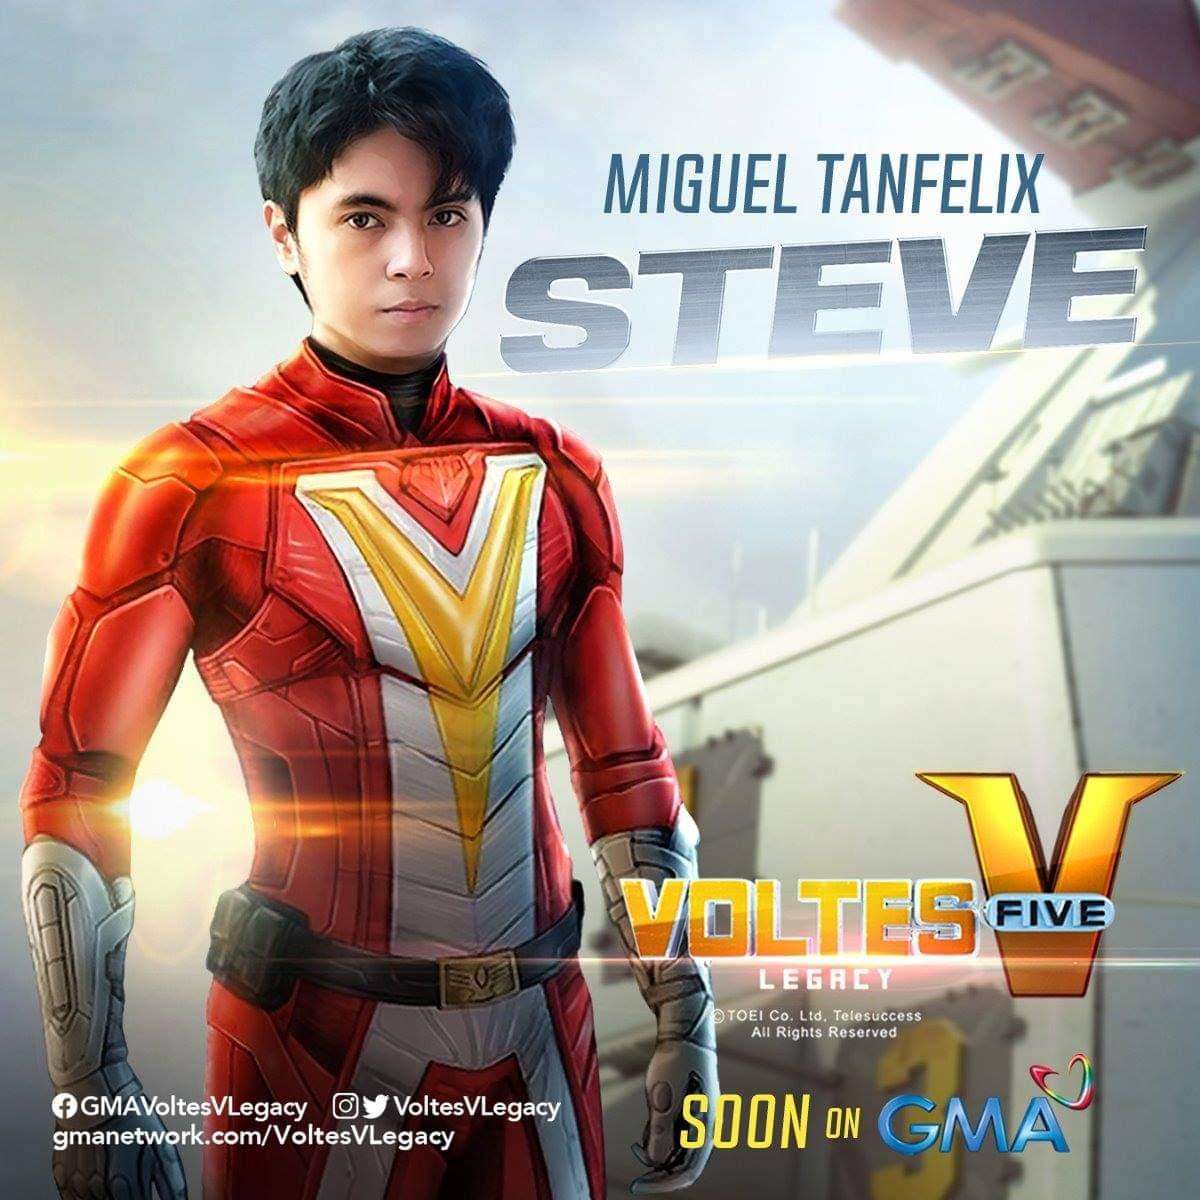 Voltes V: Legacy Achieves Spectacular FX And Brings Hope For TV Series